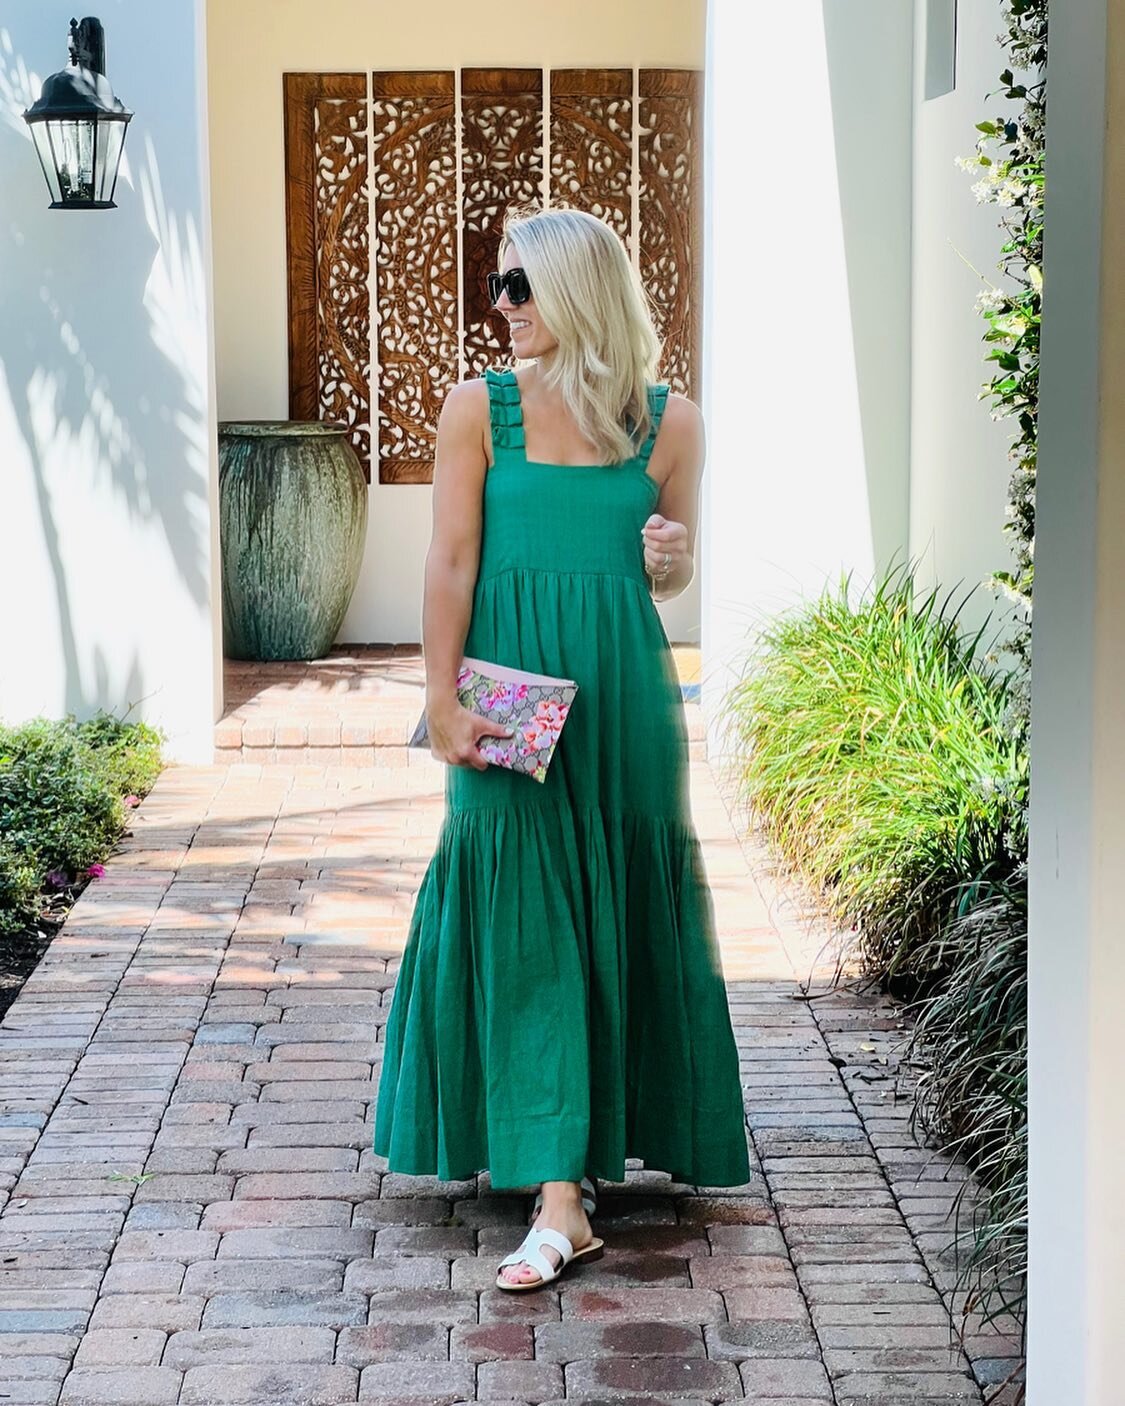 This will be your go to dress on a hot summer day! Love the color and the details on the straps! I would pair it with a low strappy heel or keep it casual with a sandal! Pair it with a colorful floral bag to complete the look! @mjstyle.me @shop.ltk #